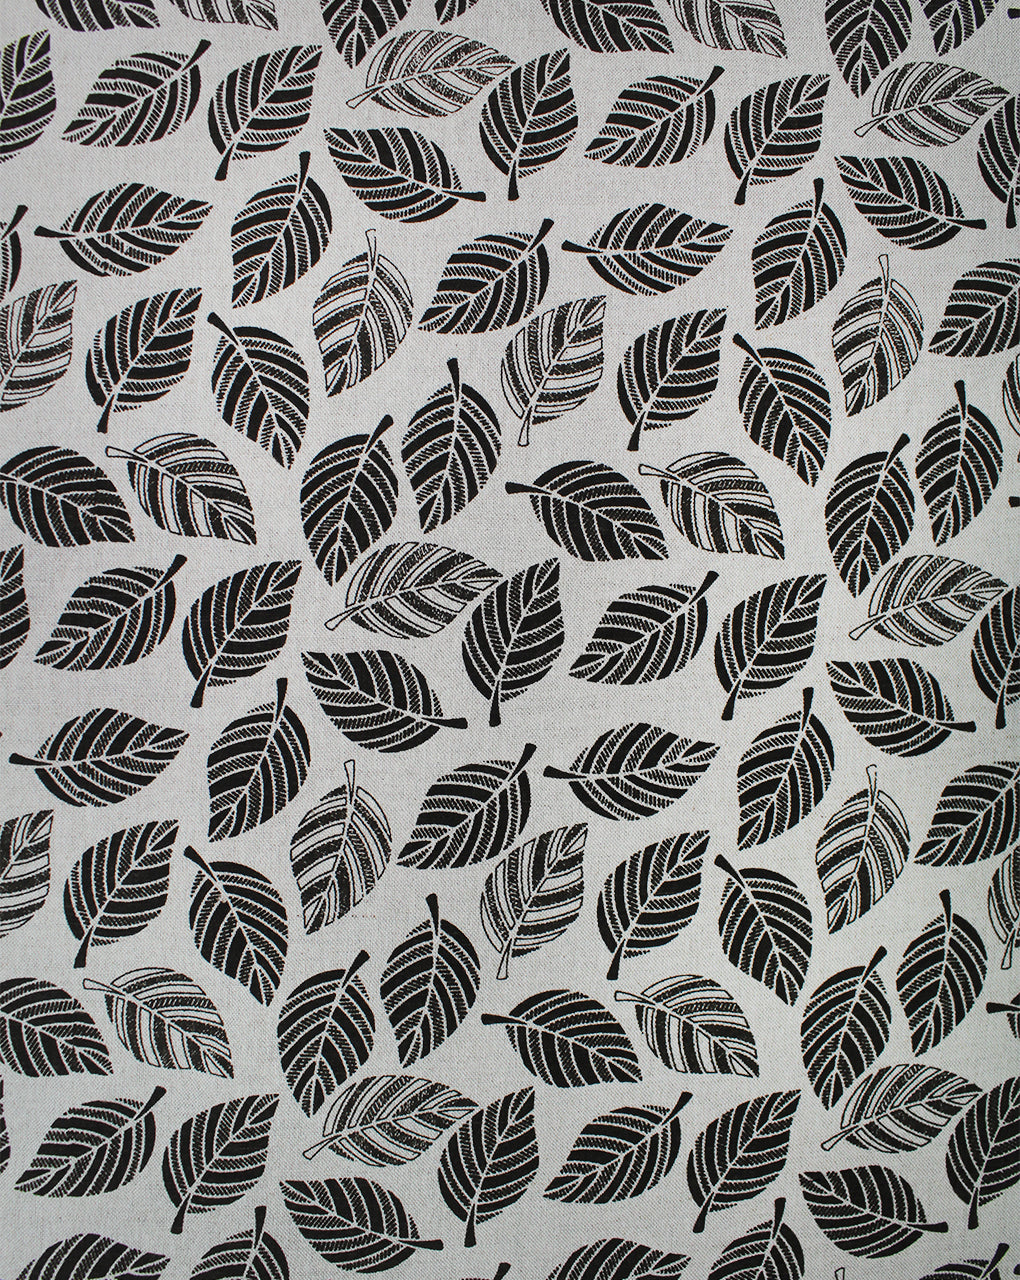 GREY AND BLACK LEAF DESIGN COTTON LINEN PRINTED FABRIC